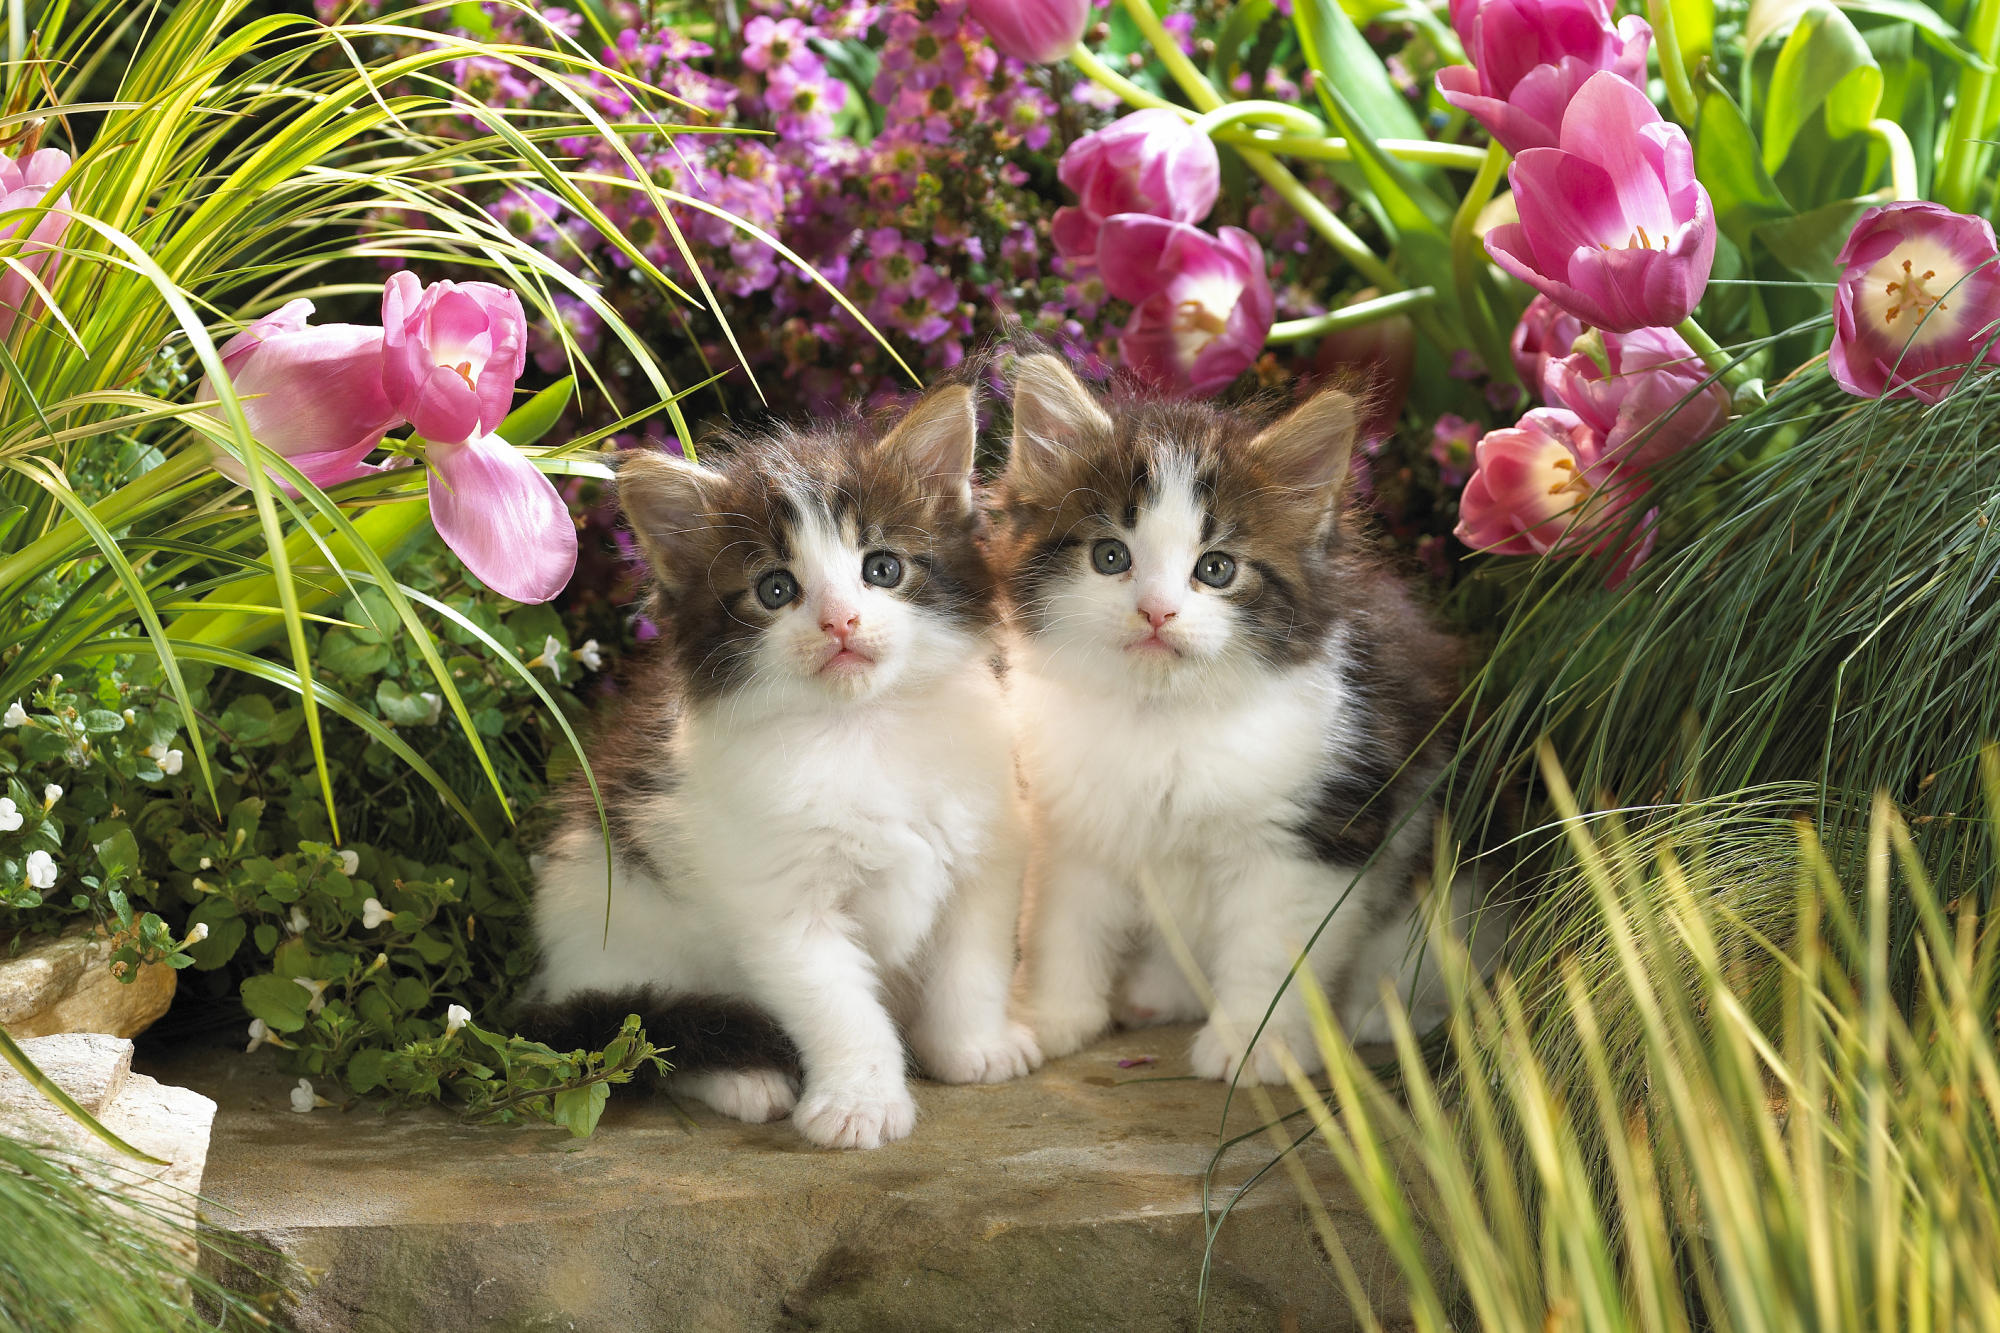 Spring Wallpaper with Cats